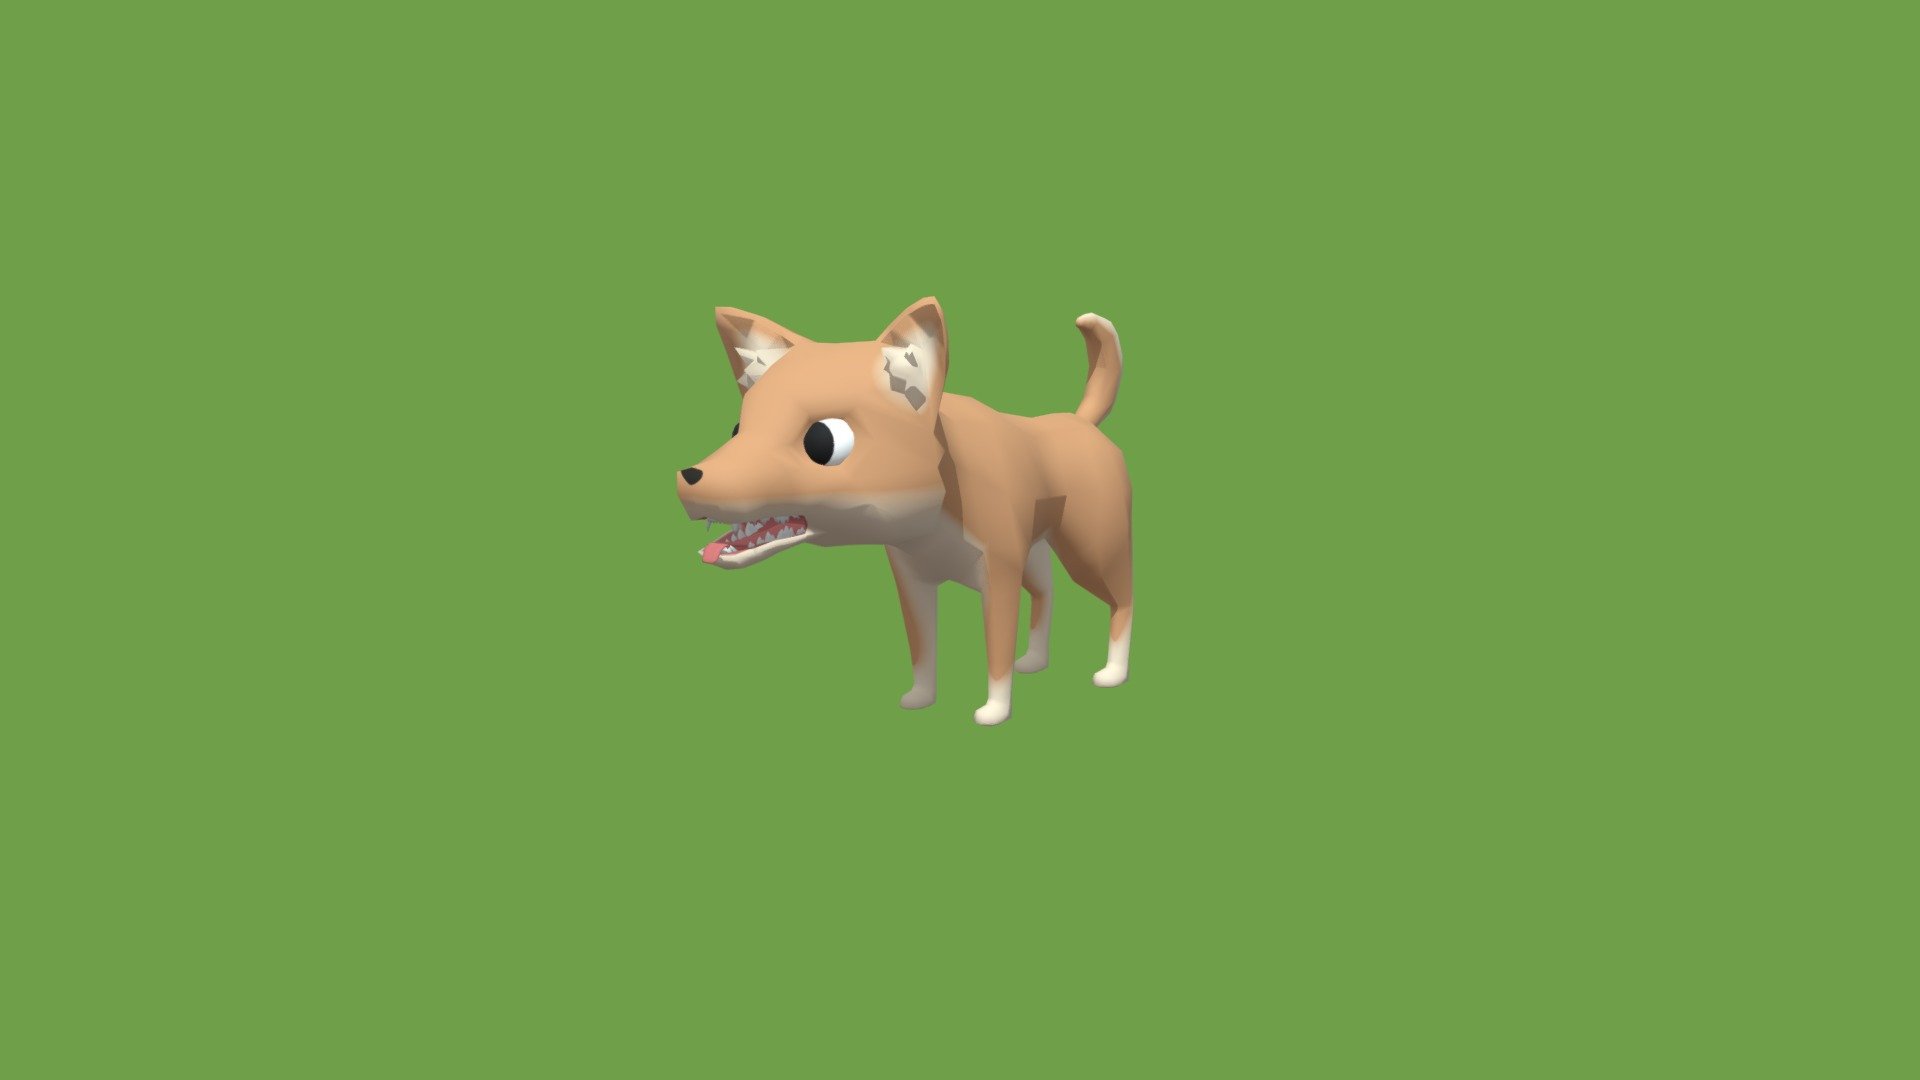 Dog 3D for Unity - 3D model by Sigmoid Button Assets (@sigmoidbutton)  [8db0c98]